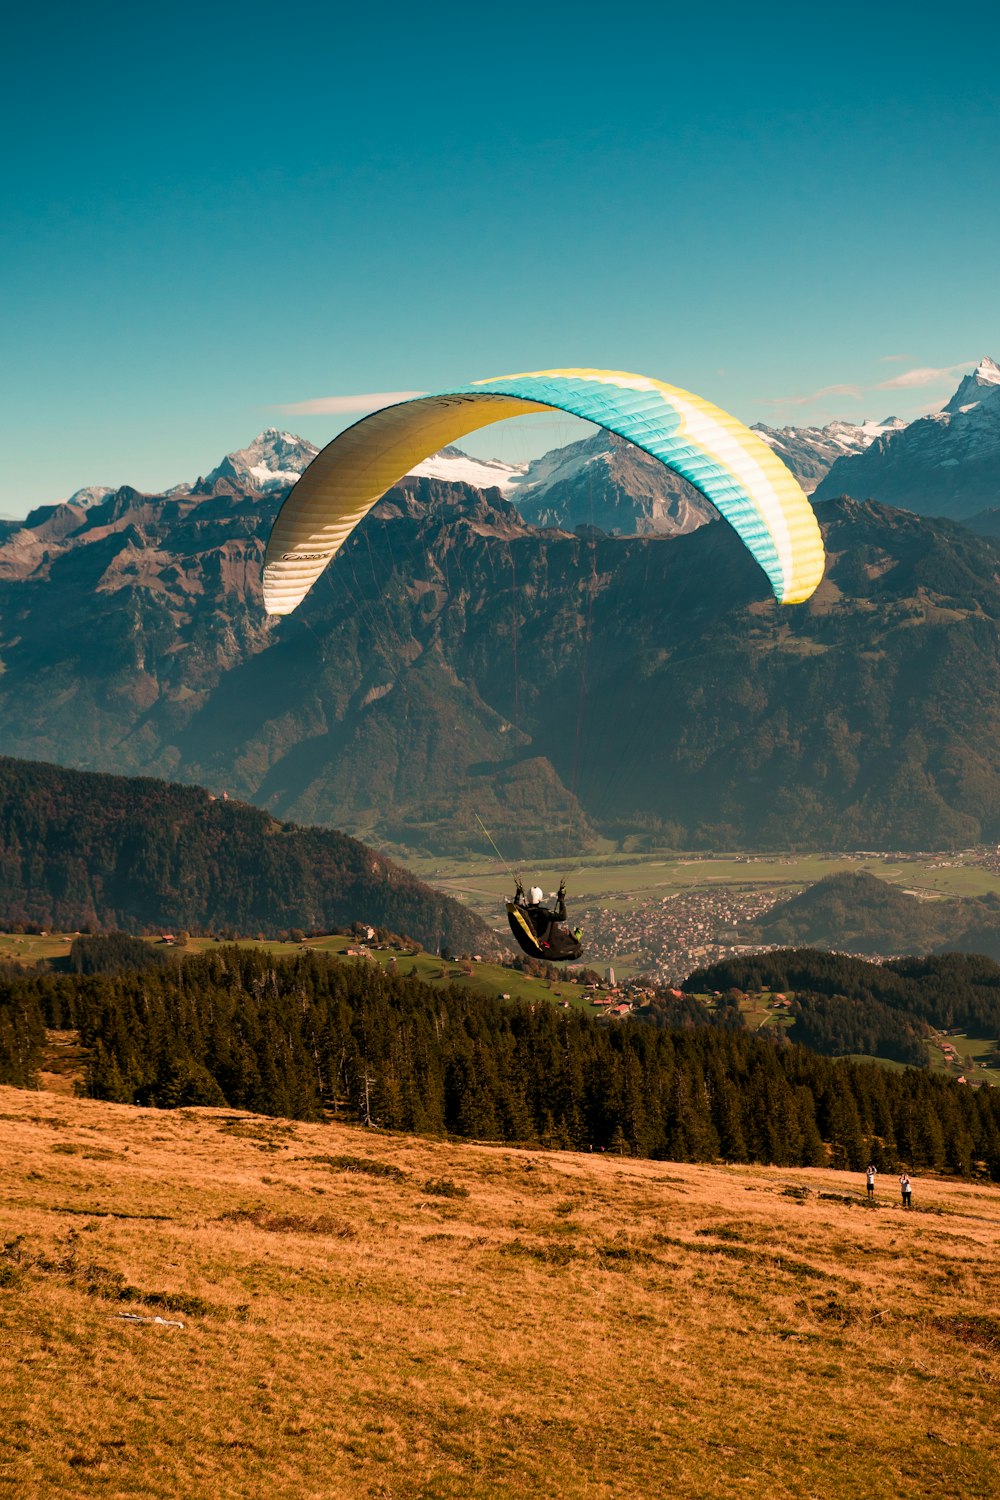 person riding parachute during daytime